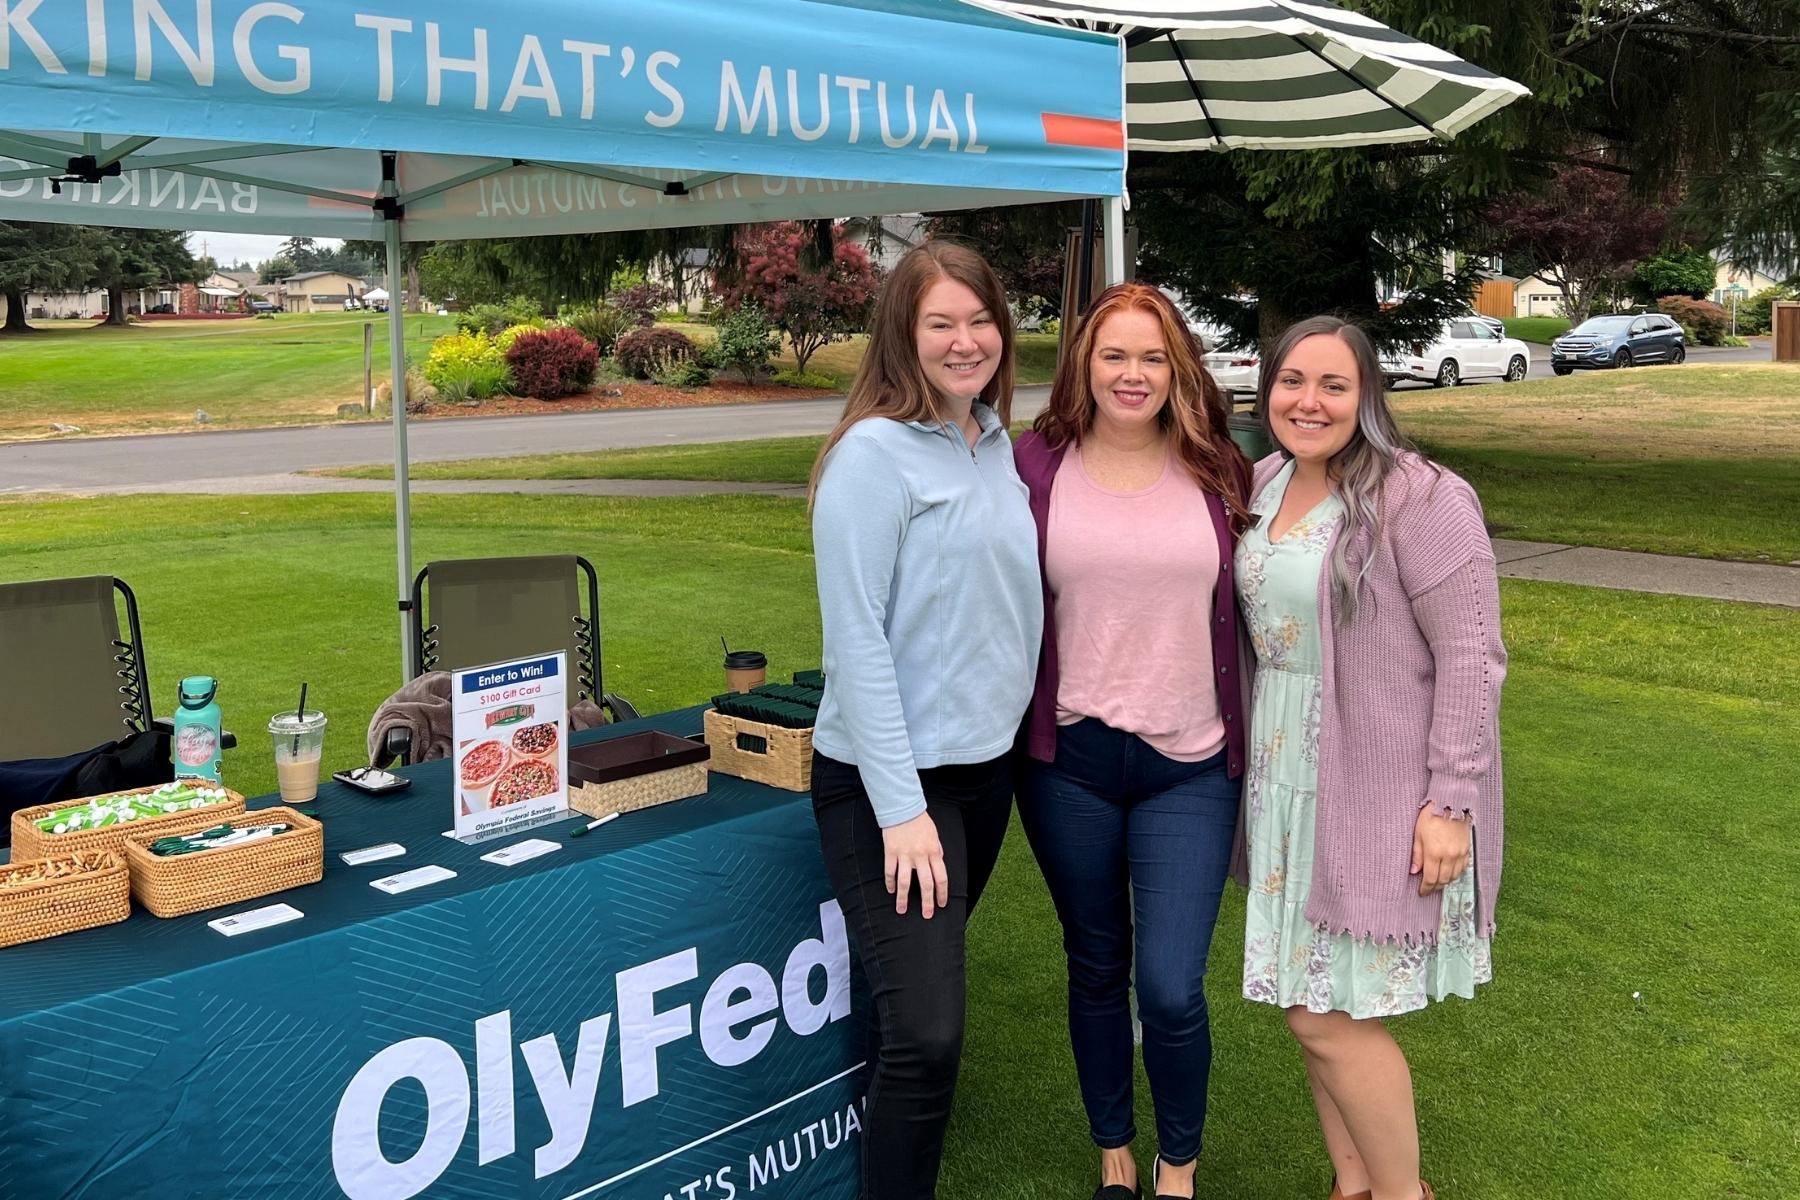 Olyfedders at a golf tournament